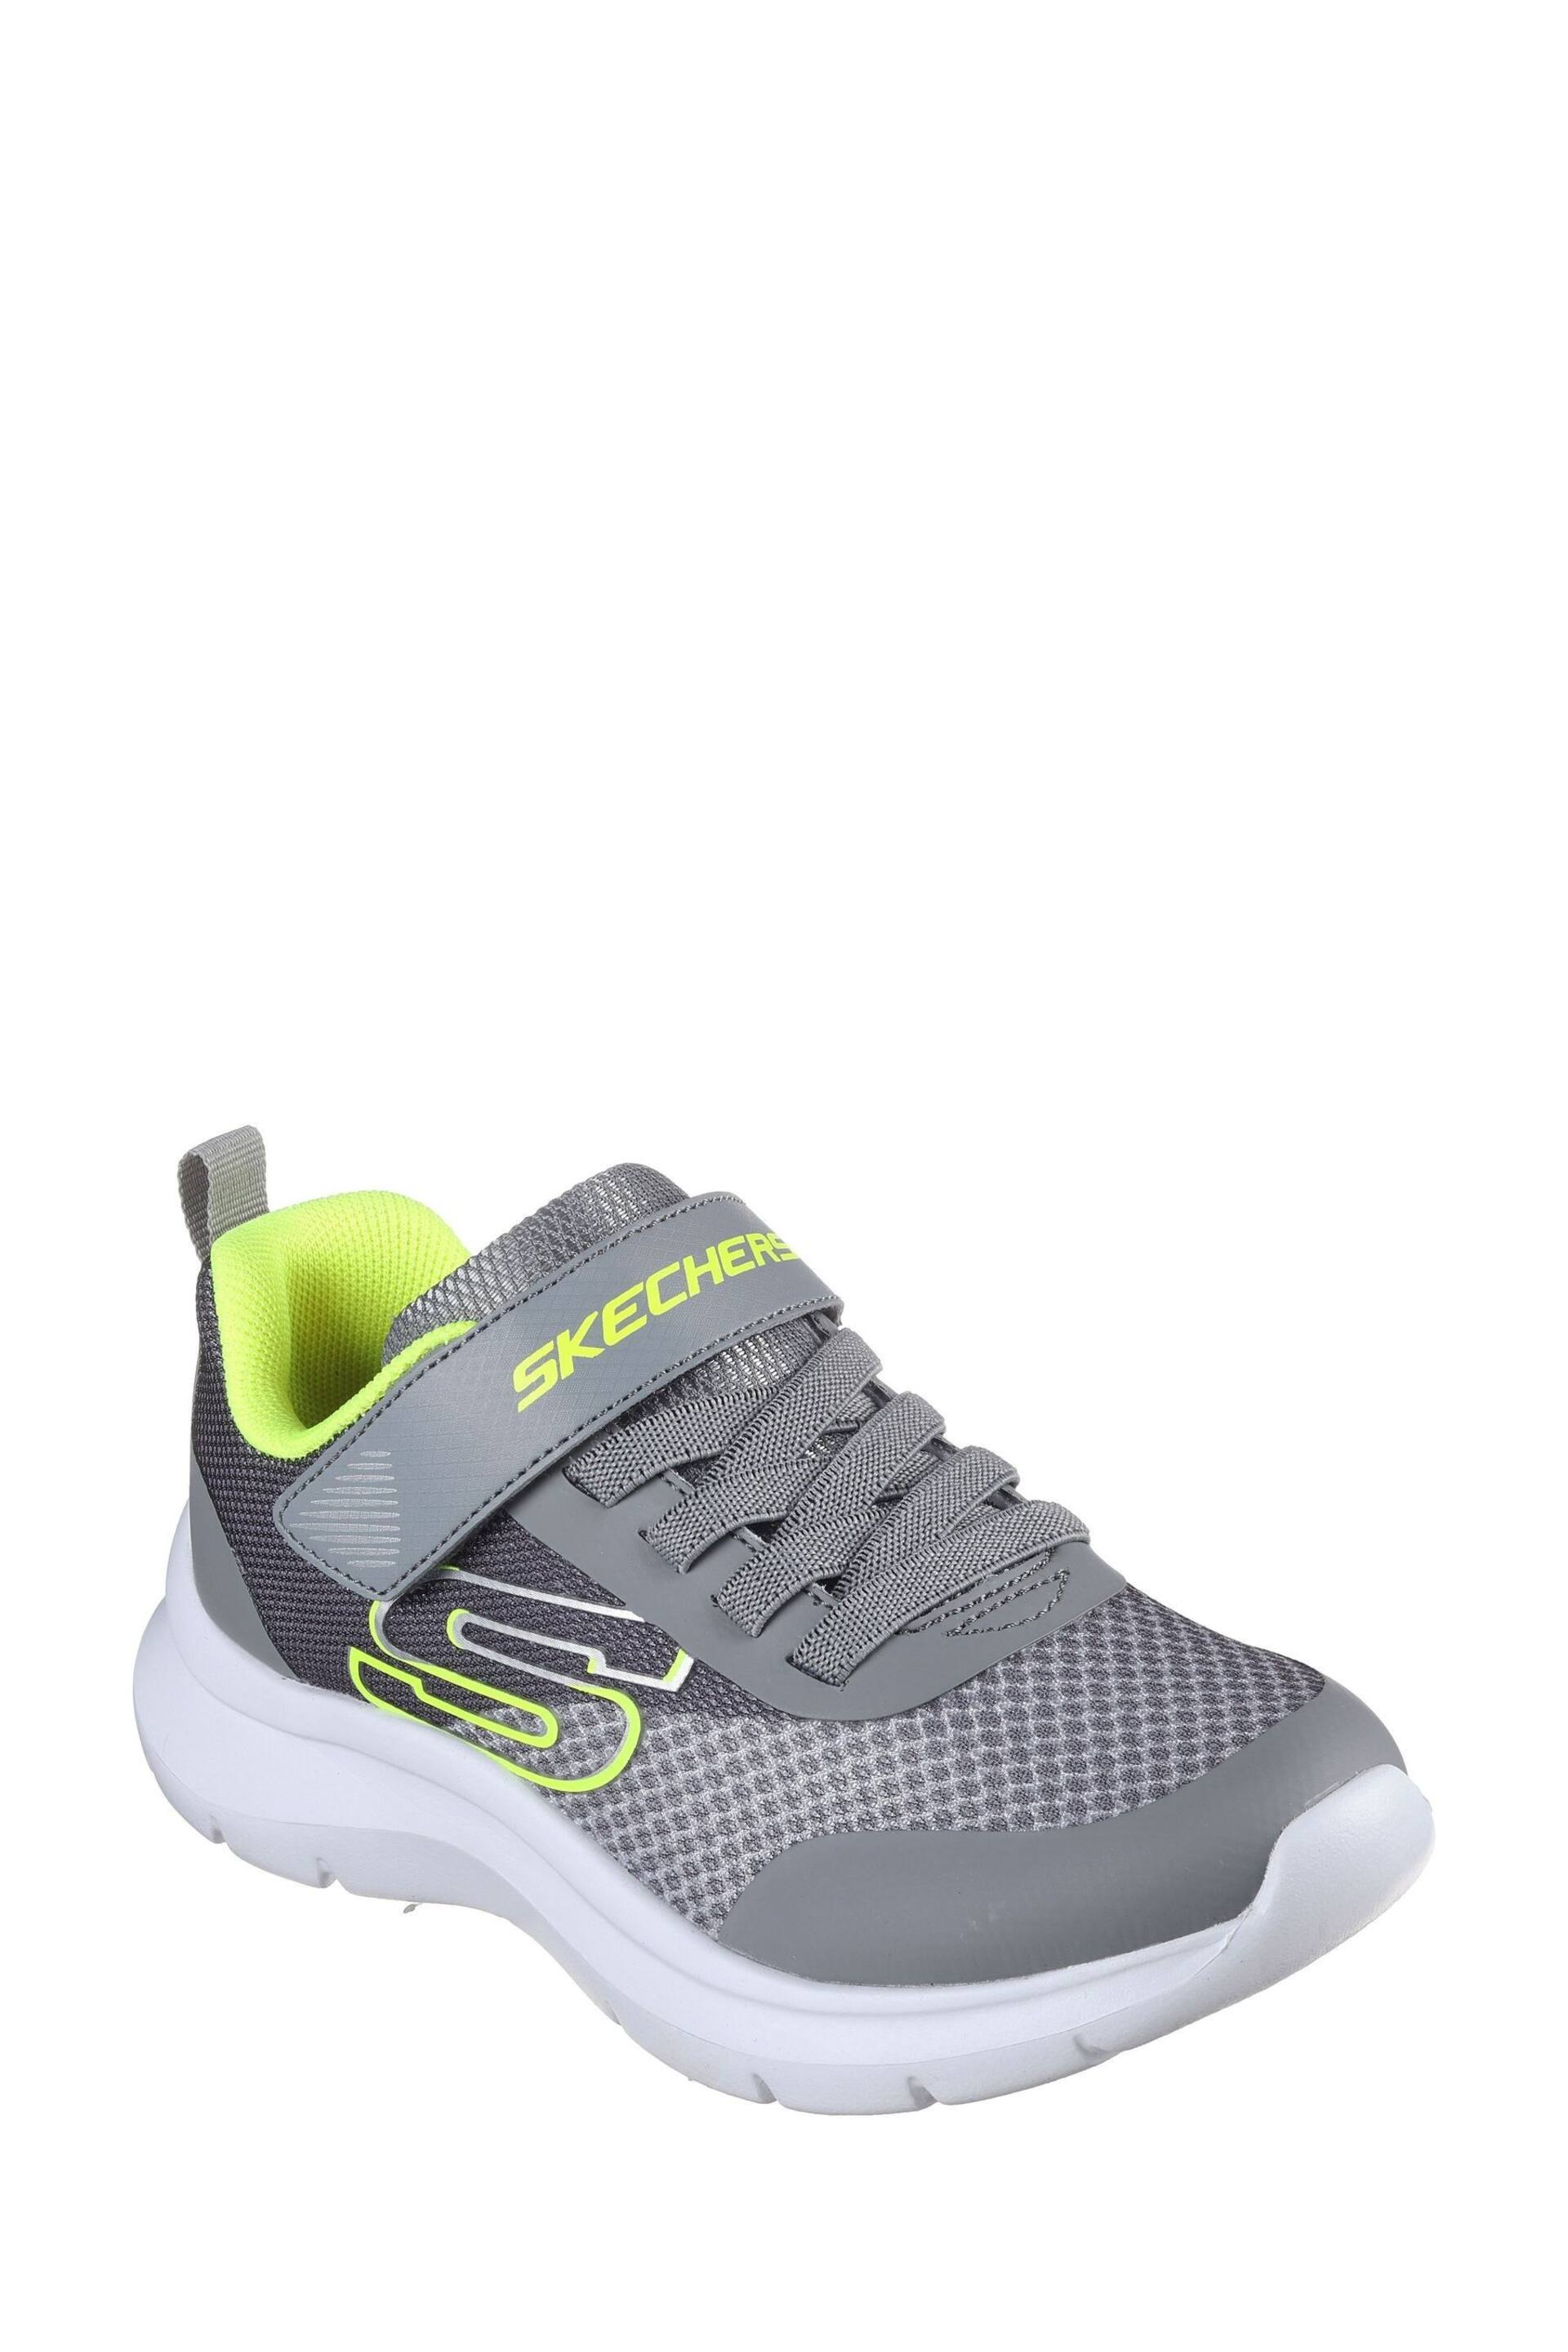 Skechers Grey Fast Solar Squad Trainers - Image 3 of 5